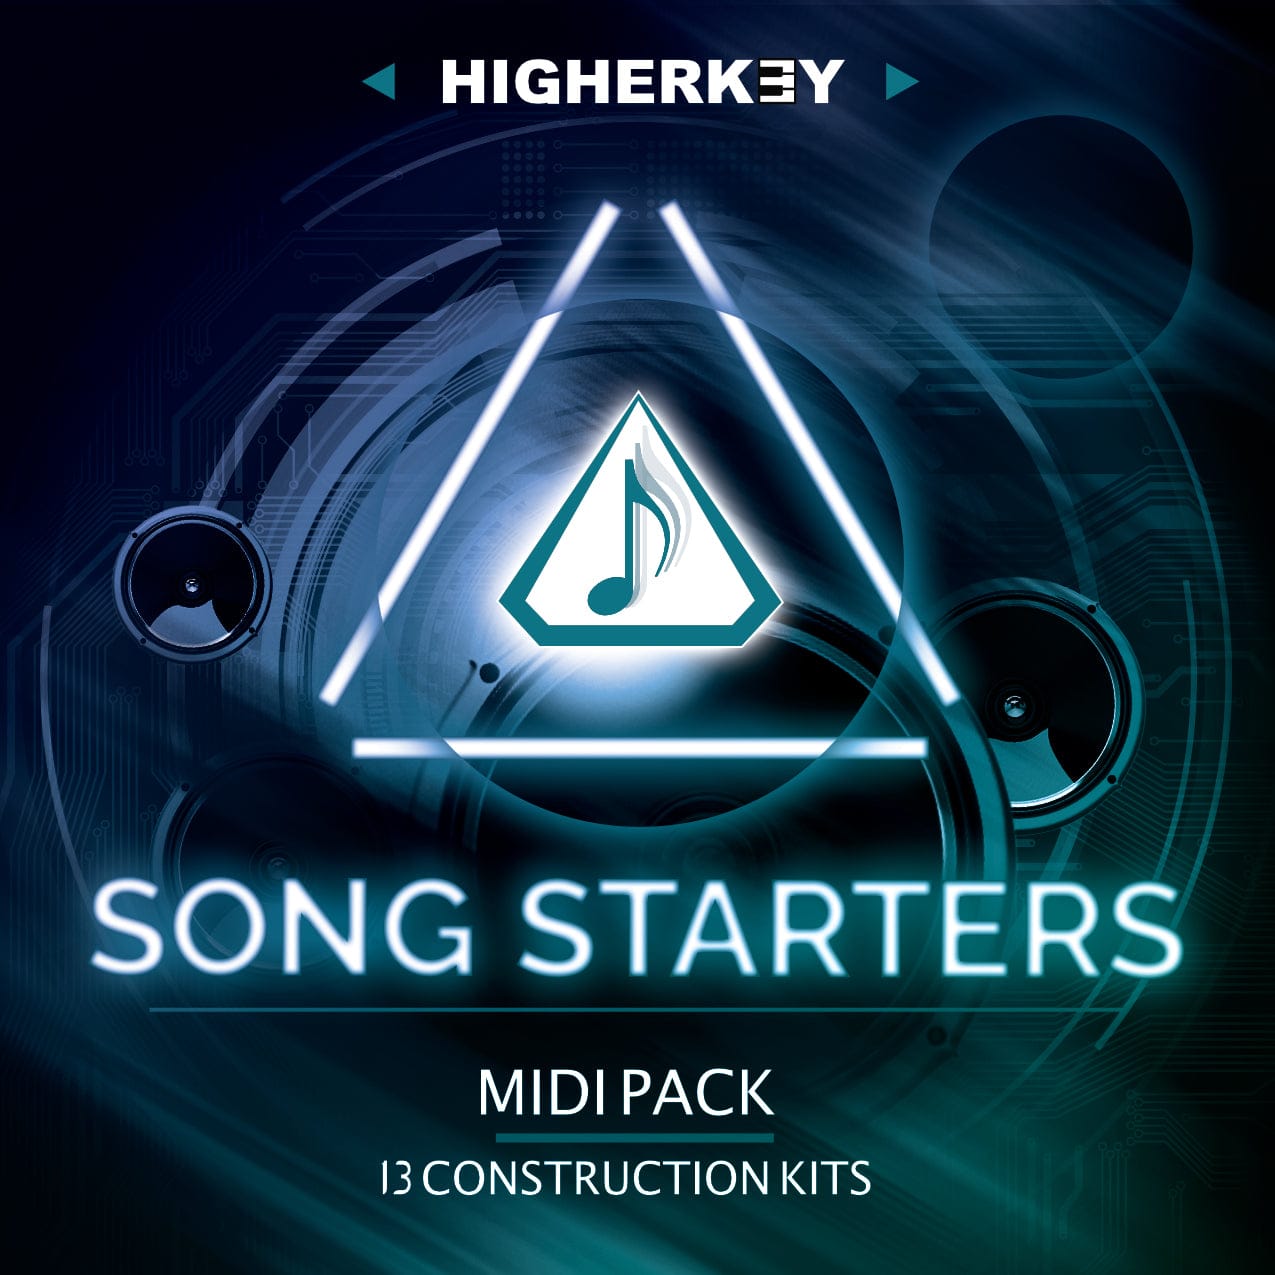 Song Starters